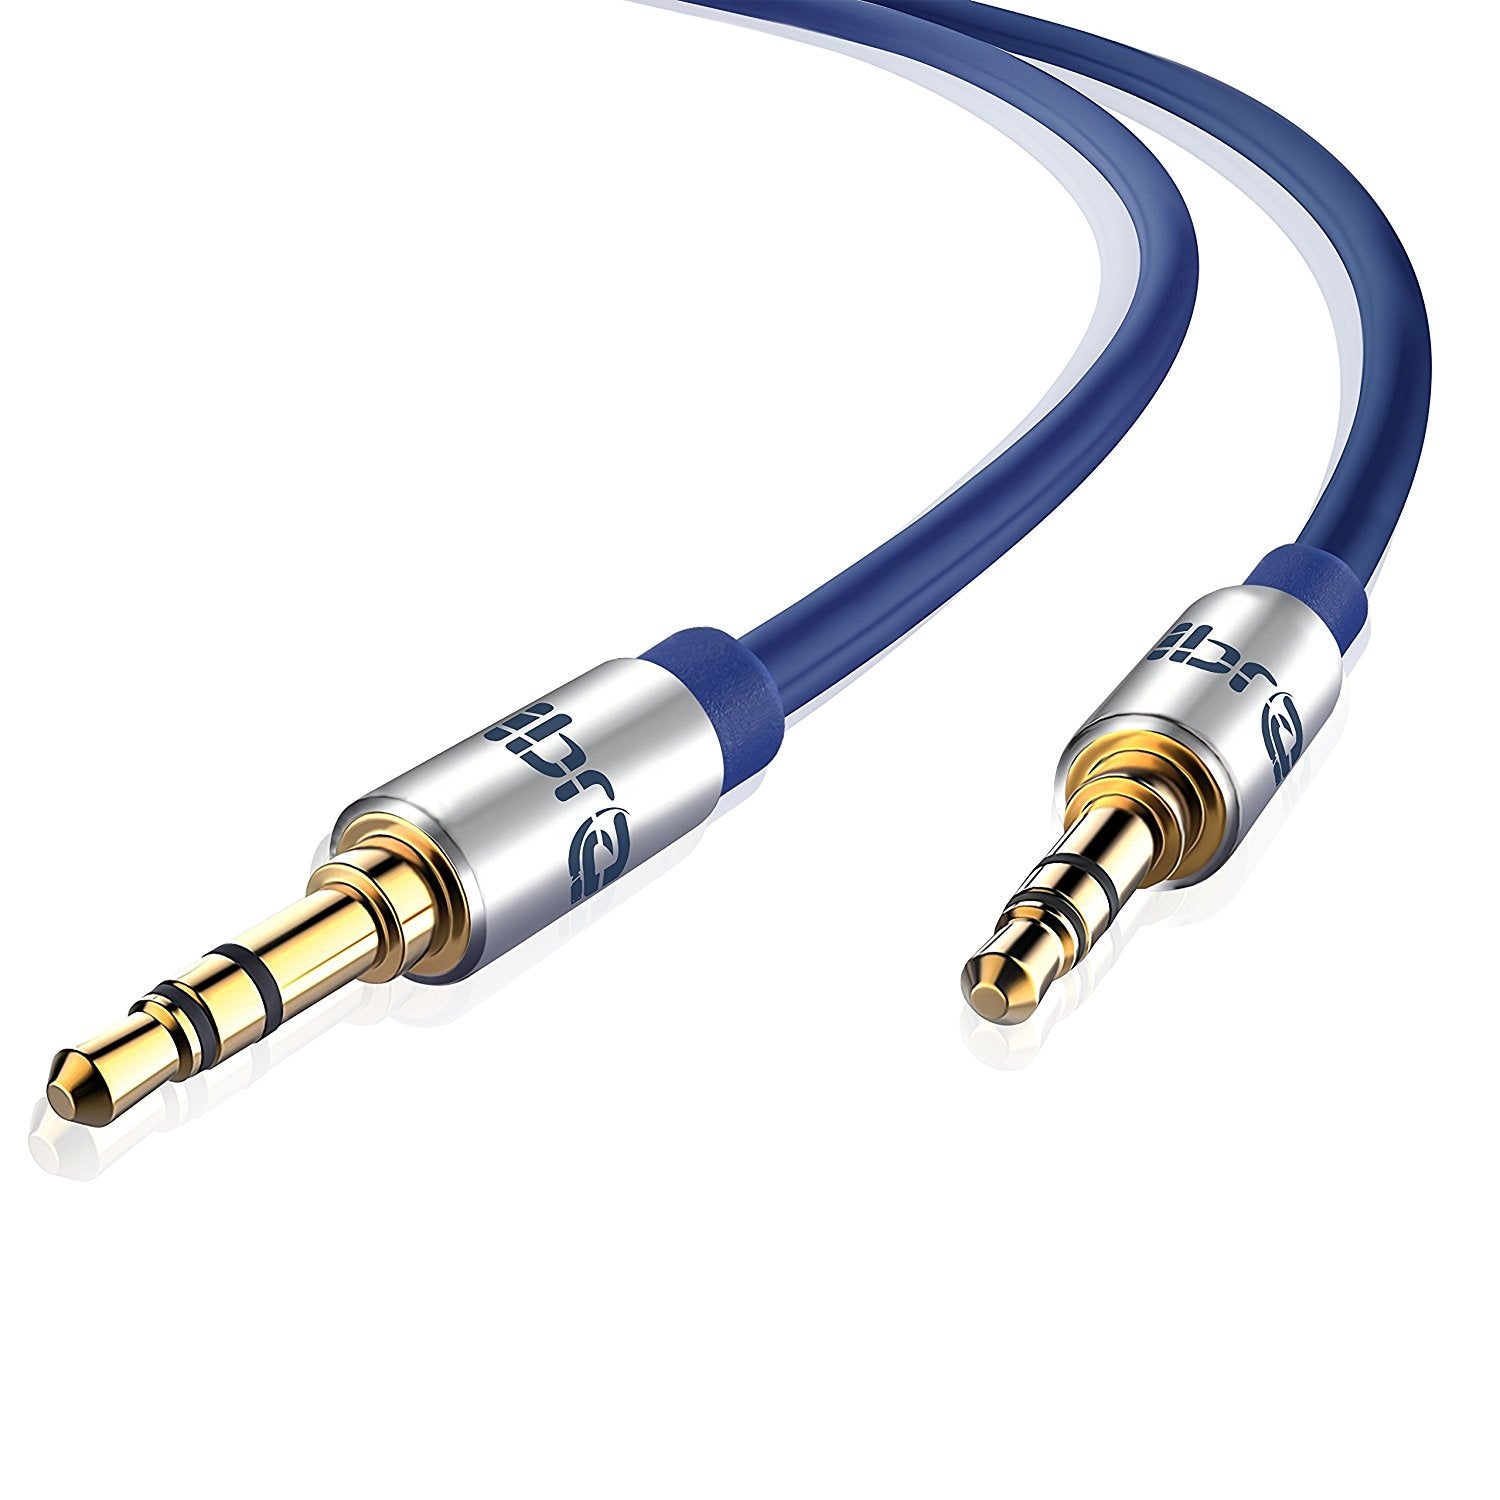 Aux Cable 1.5M 3.5mm Stereo Pro Auxiliary Audio Cable - for Beats Headphones Apple iPod iPhone iPad Samsung LG Smartphone MP3 Player Home / Car etc - IBRA Blue